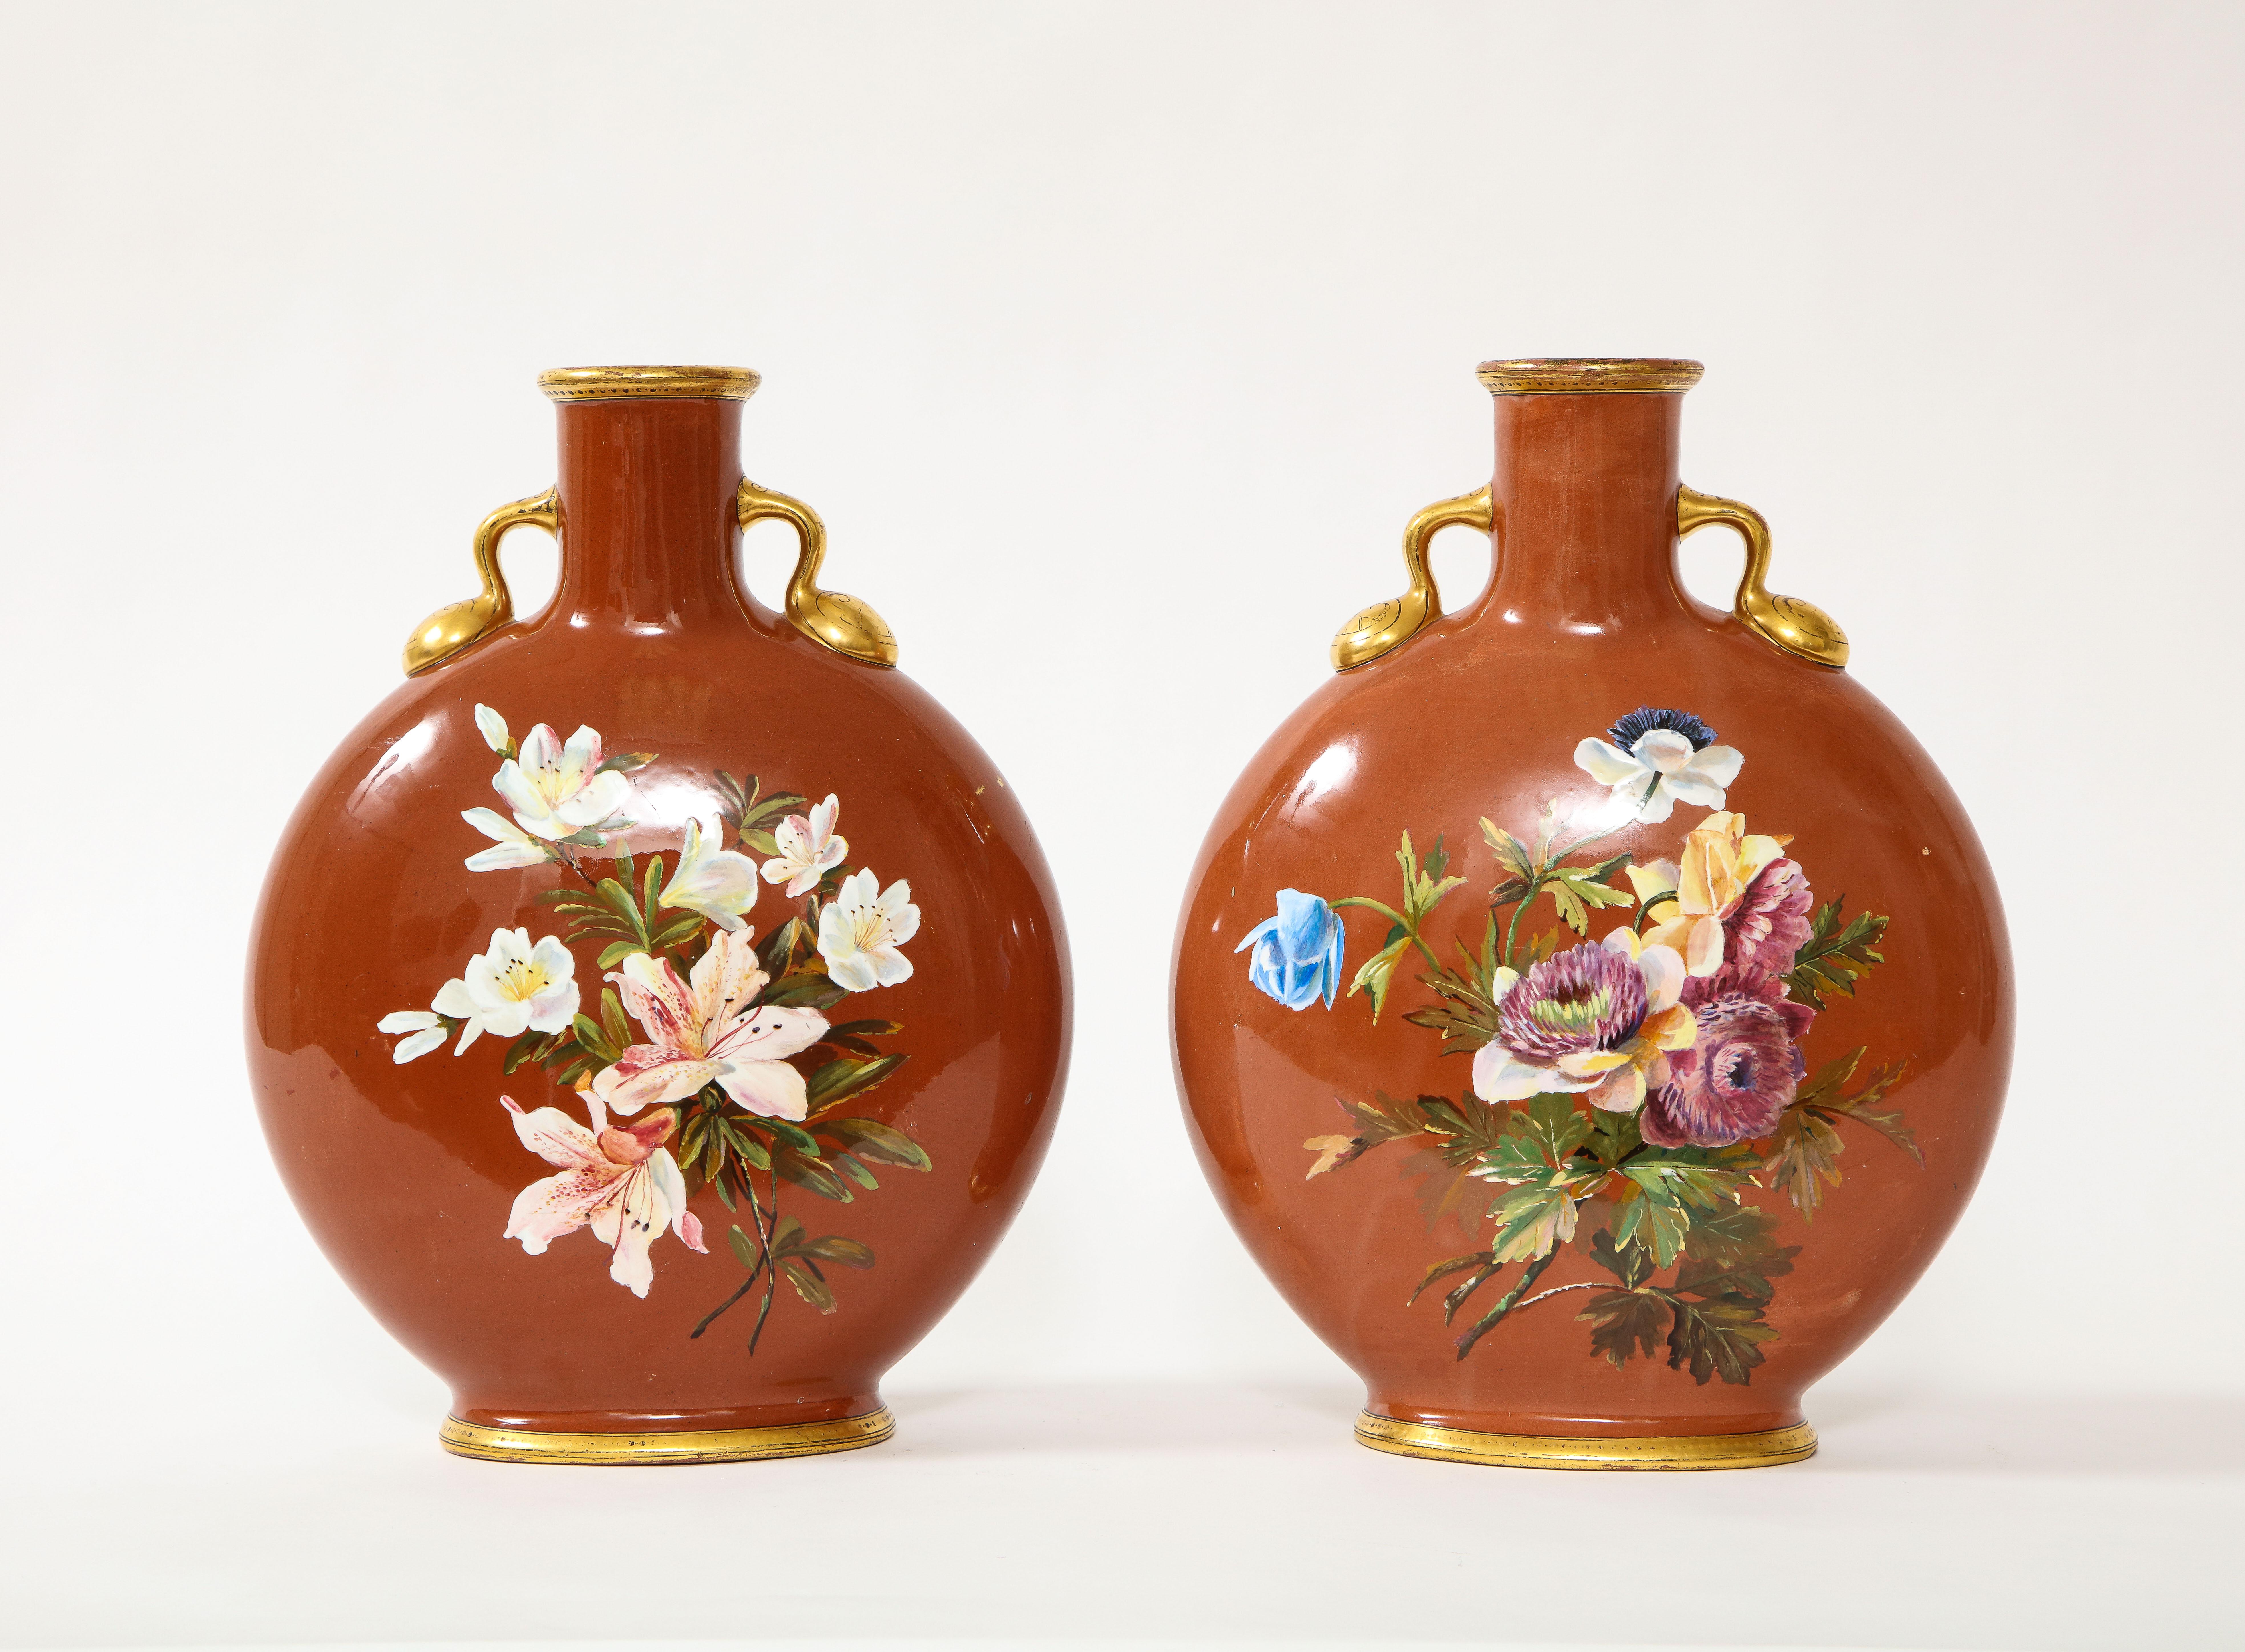 A fabulous pair of Louis XVI style 19th century English Mintons Coral ground floral painted moon flasks with 24k hand-painted decoration. Exceptional in quality and craftsmanship, these moon flasks are fabulously hand-painted with many different